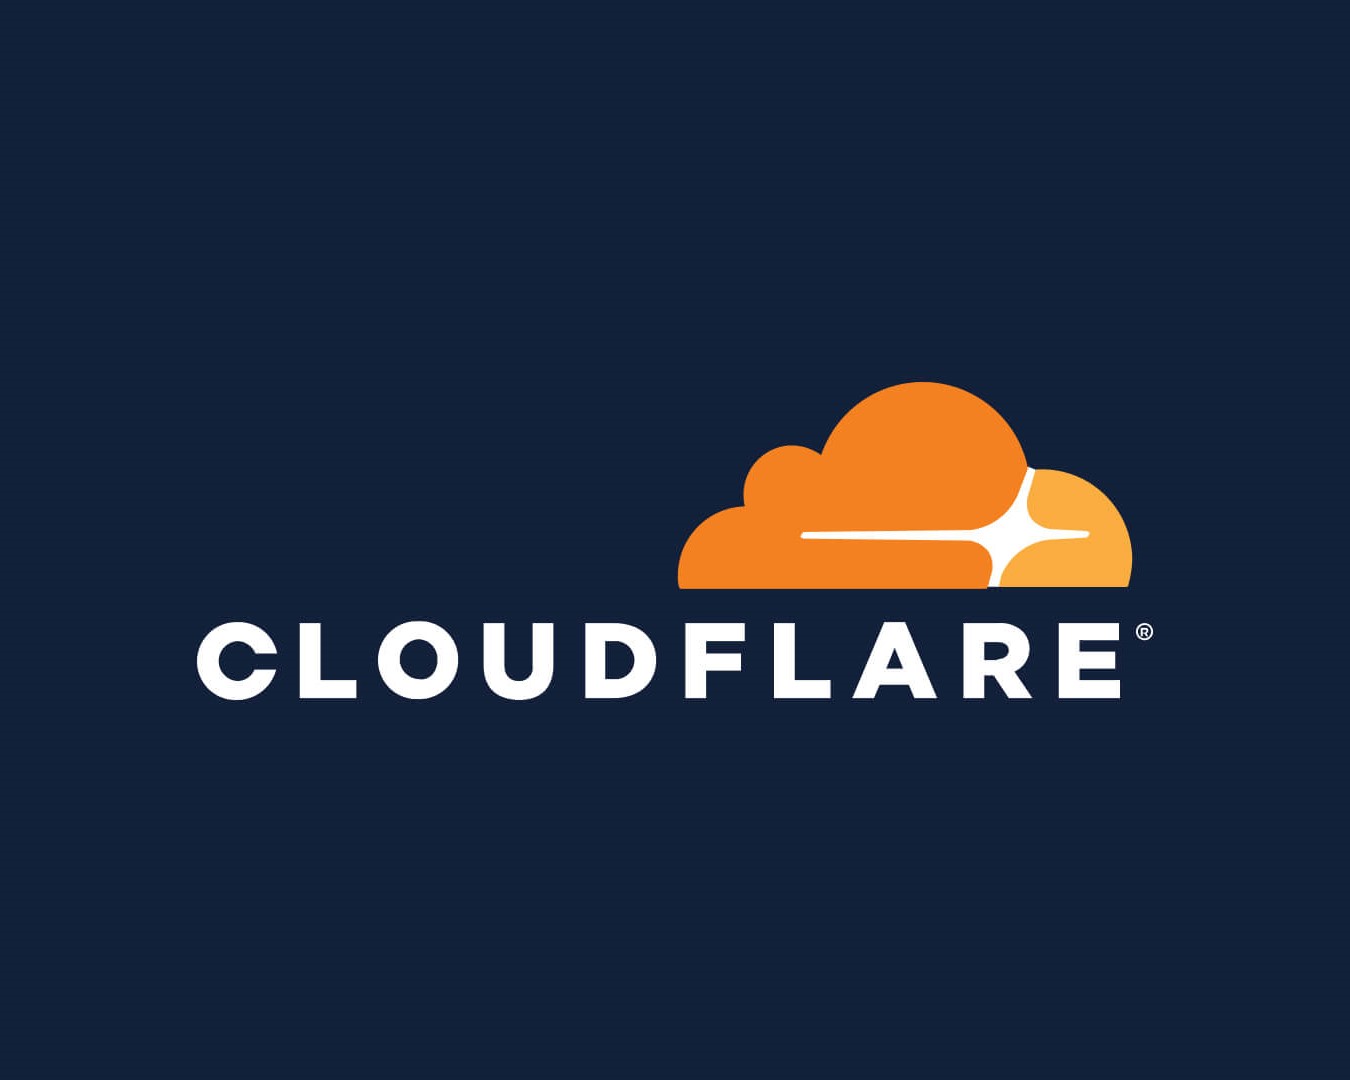 Logic Flaws Let Attackers Bypass Cloudflare’s Firewall and DDoS Protection